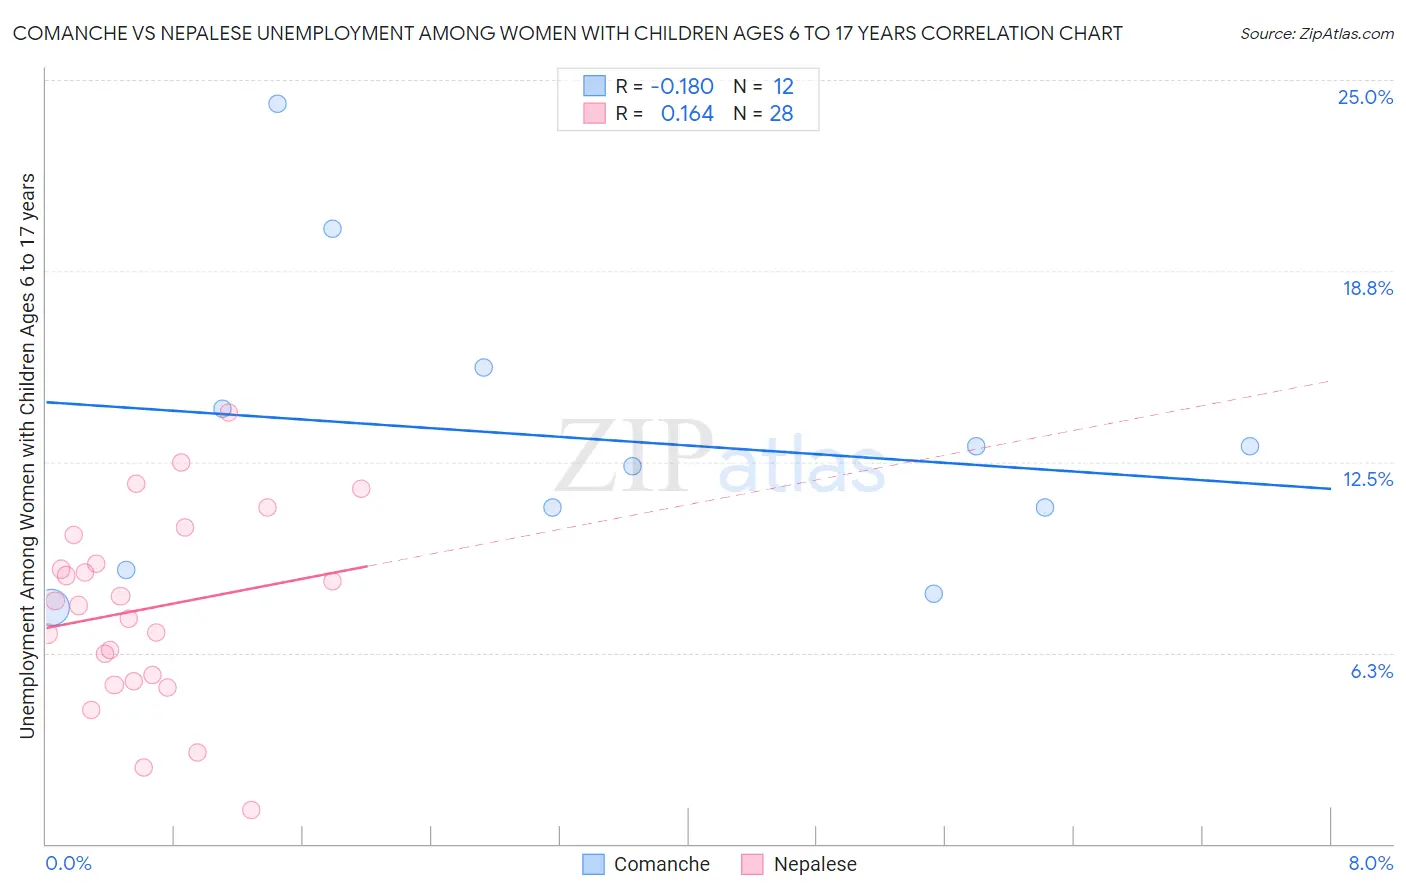 Comanche vs Nepalese Unemployment Among Women with Children Ages 6 to 17 years